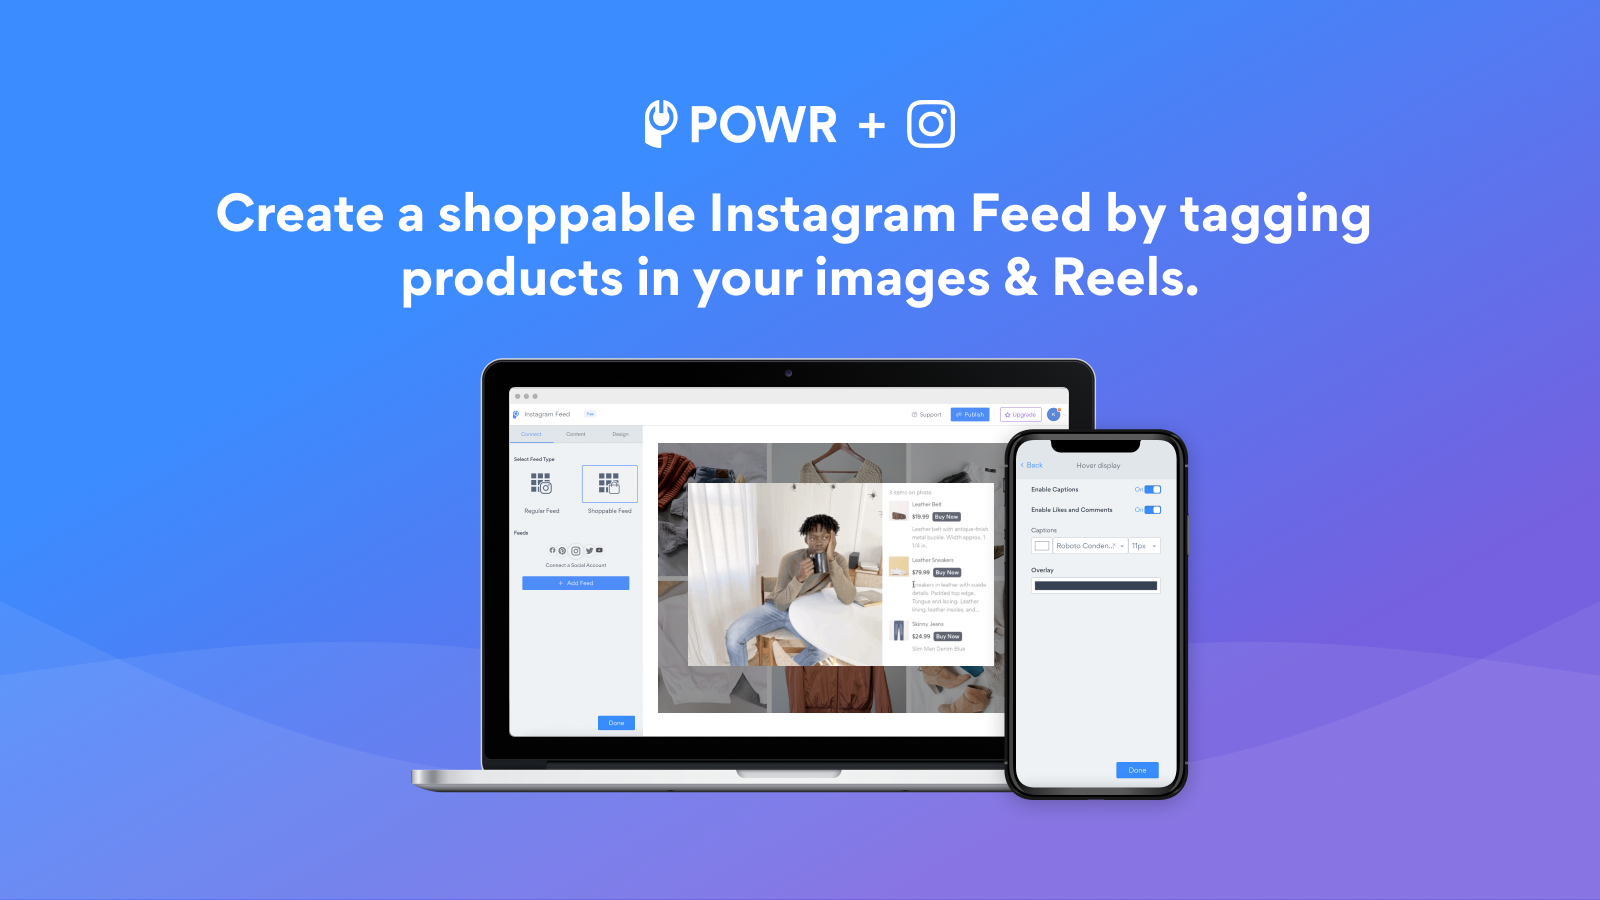 Create a shoppable Instagram Feed by tagging products in images